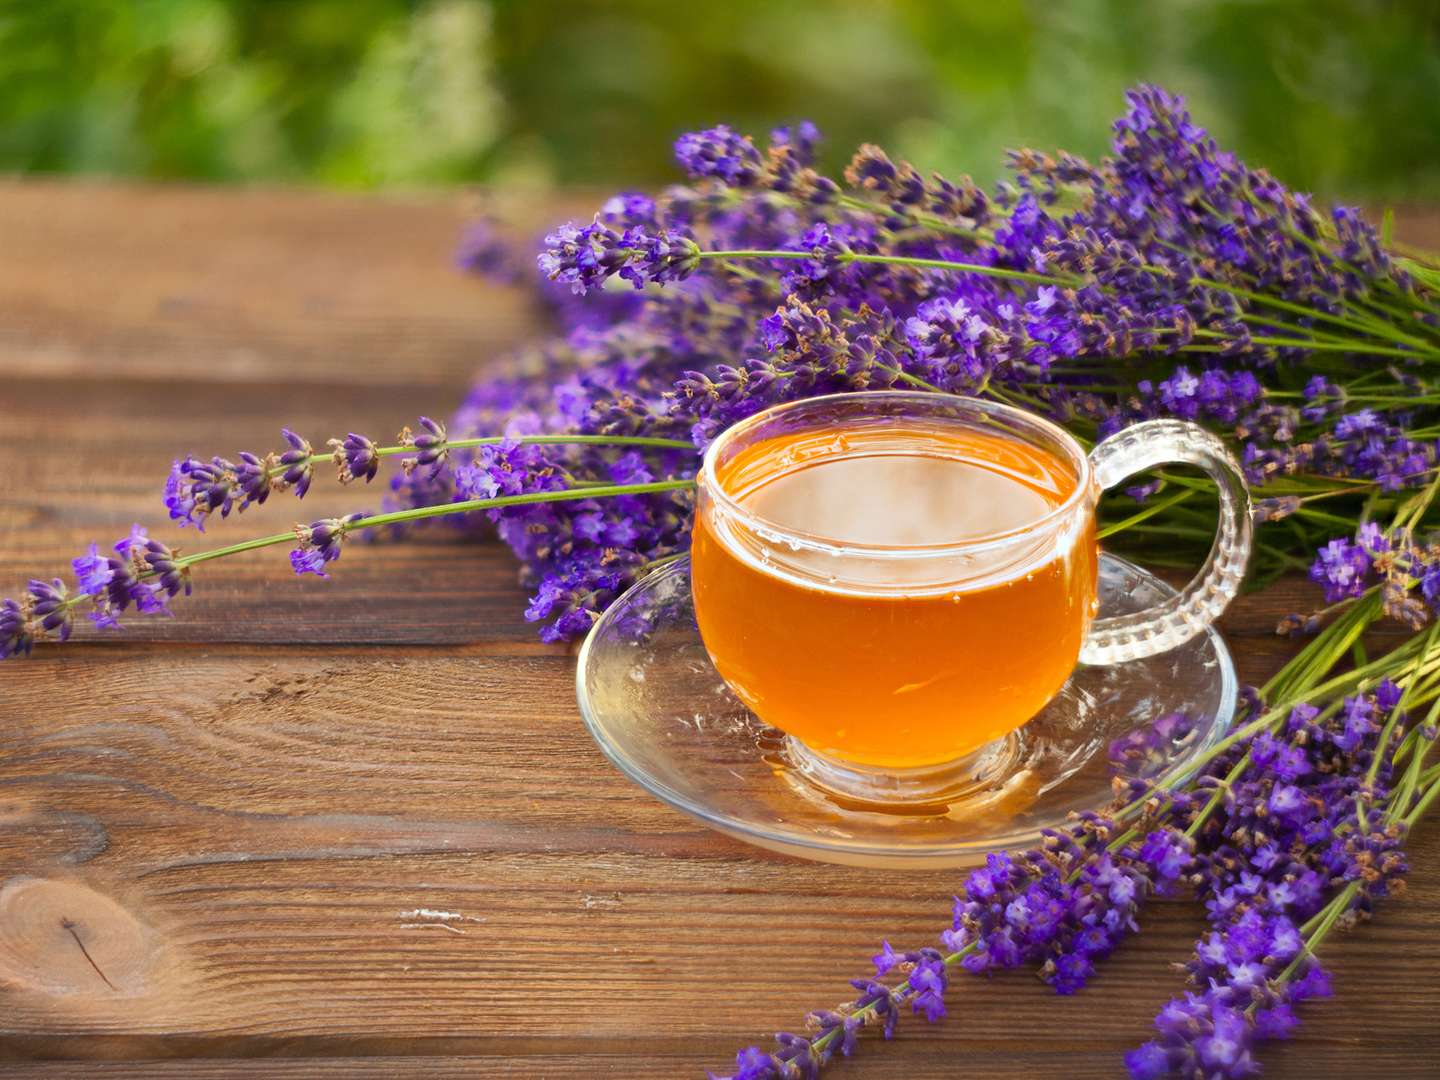 Lavender Ingestibles For Anxiety And Depression?